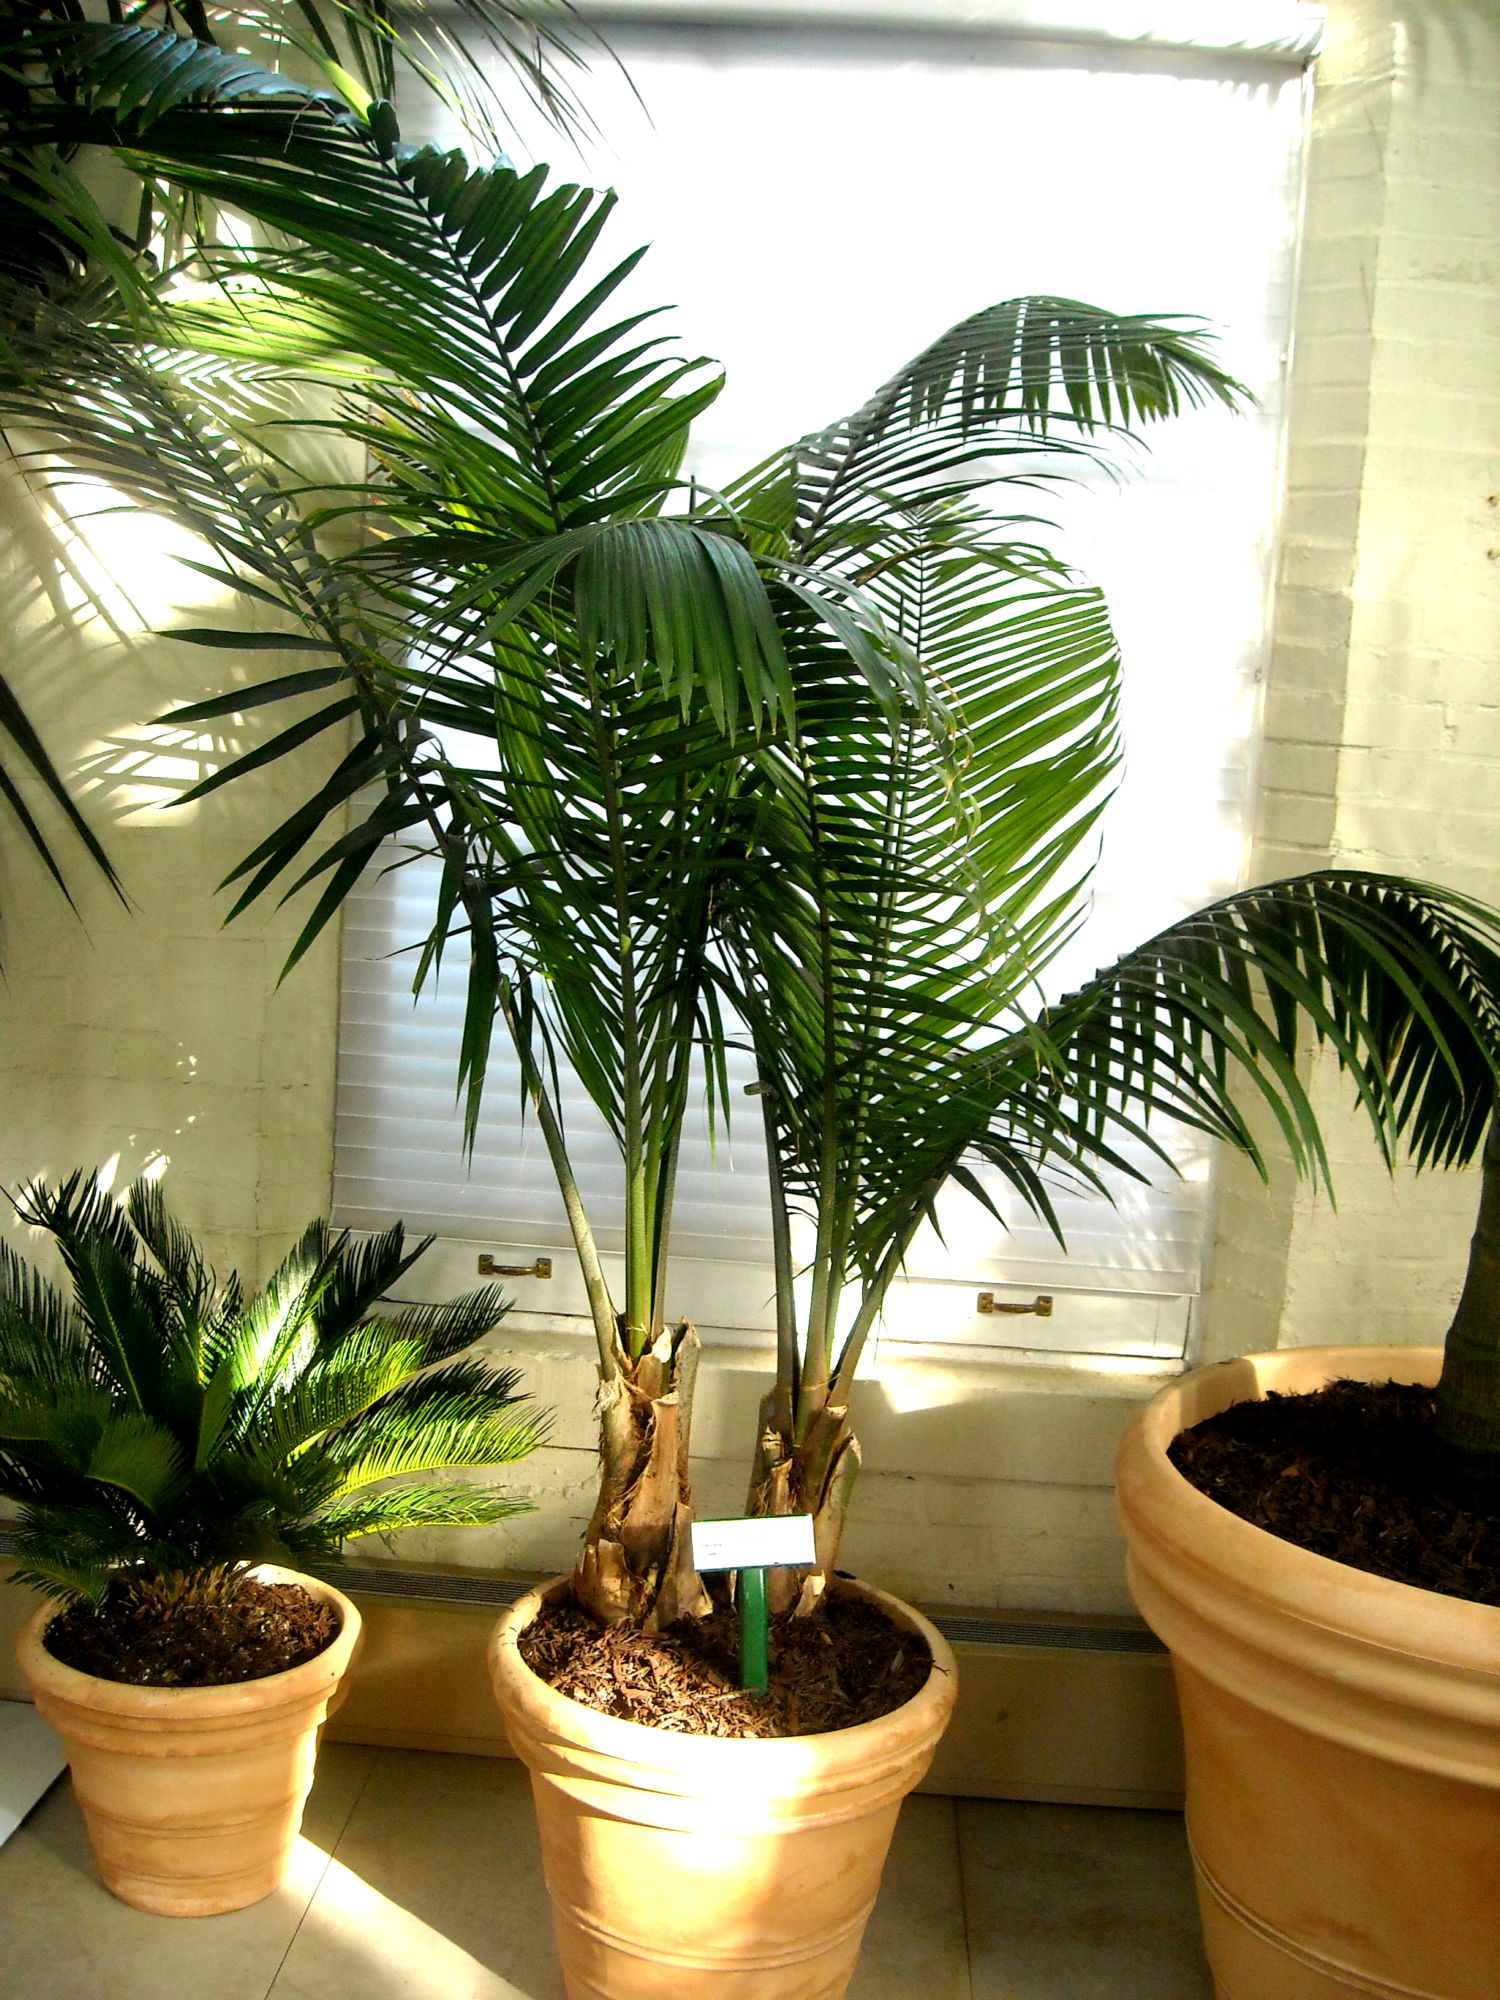 Palm Piper House Walter Knoll Florist Client Exotic Palm Trees Wk Landscapes St Louis Mo,What Temp To Cook Pork Chops On Grill